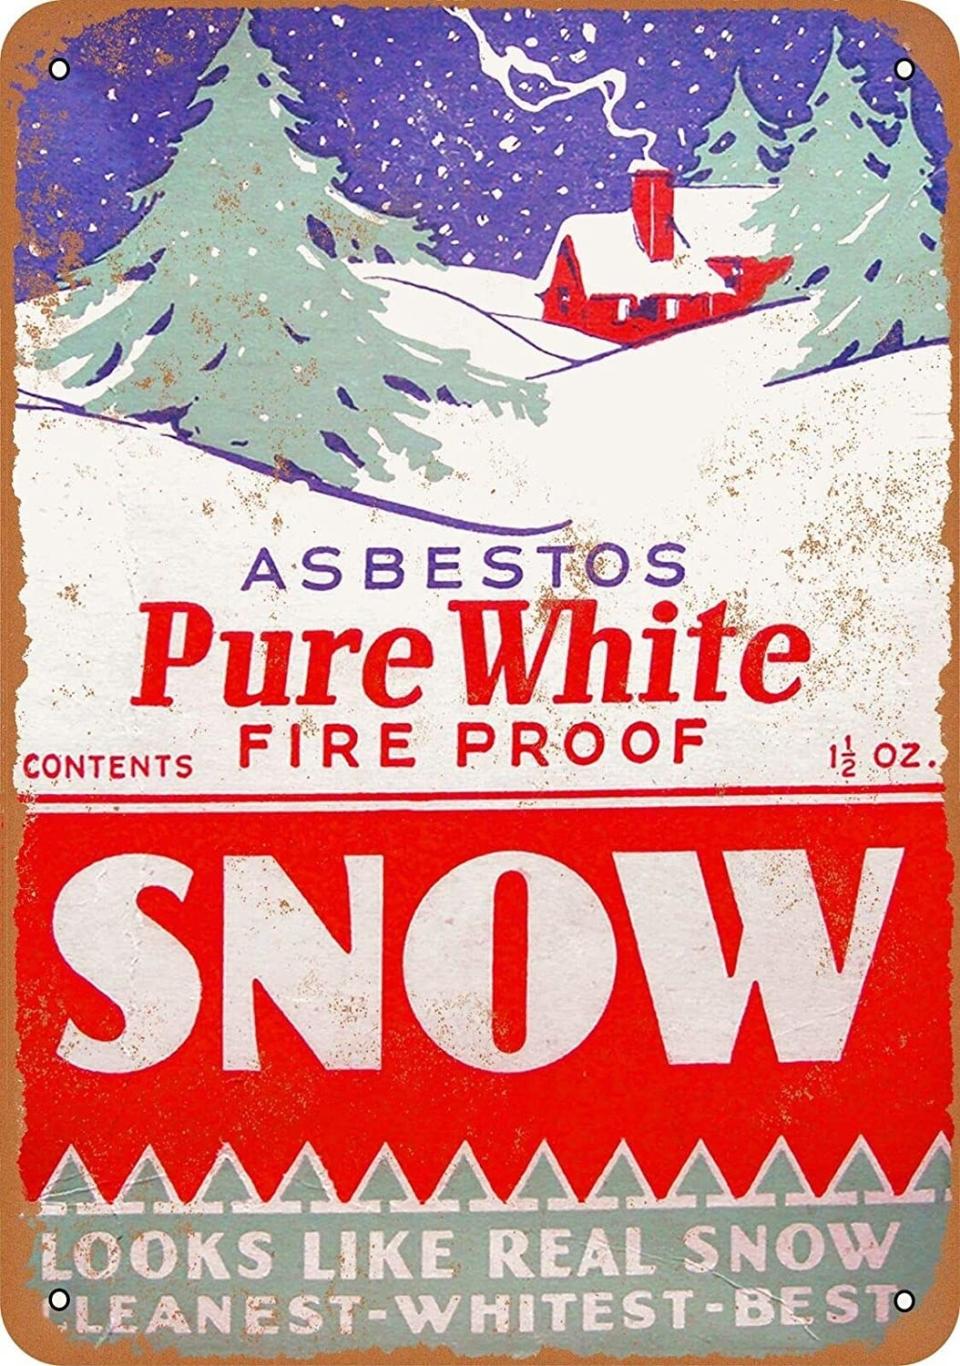 The box cover for fake snow made of asbestos that reads, "Asbestos Pure White, Fire Proof Snow. Looks like real snow. Cleanest, whitest, best"